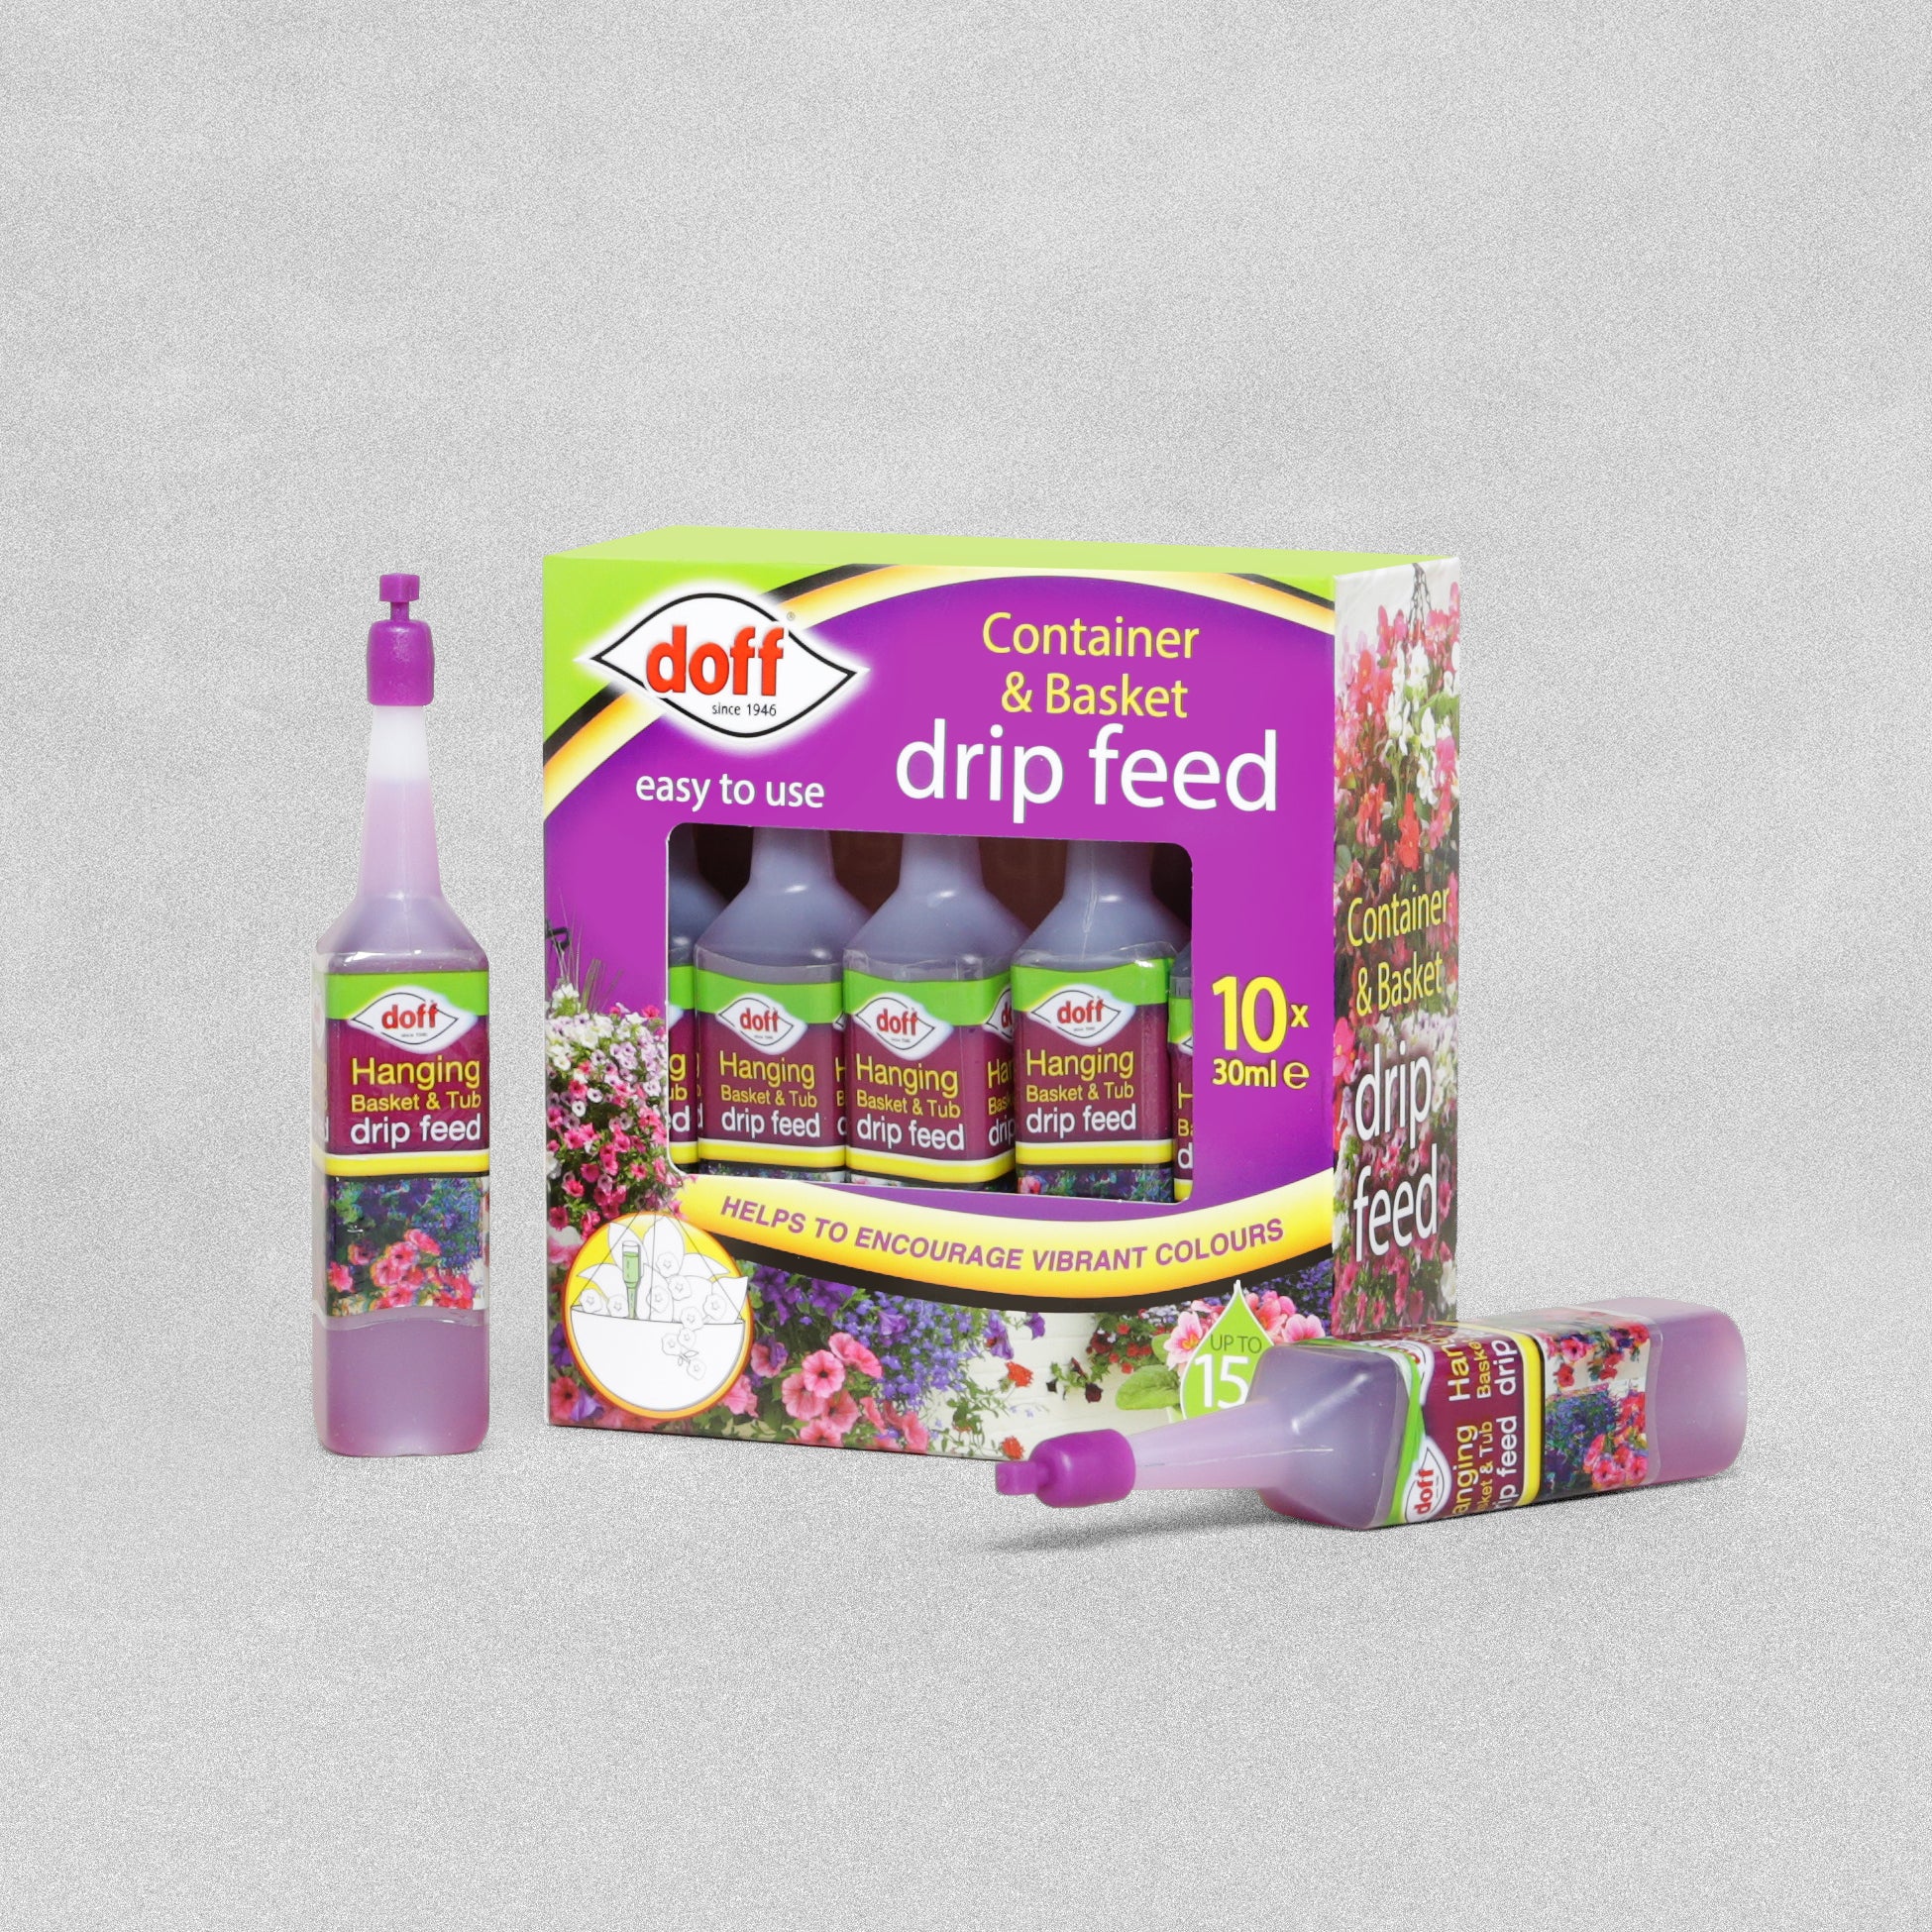 Doff Container & Basket Drip Feed - 10pcs